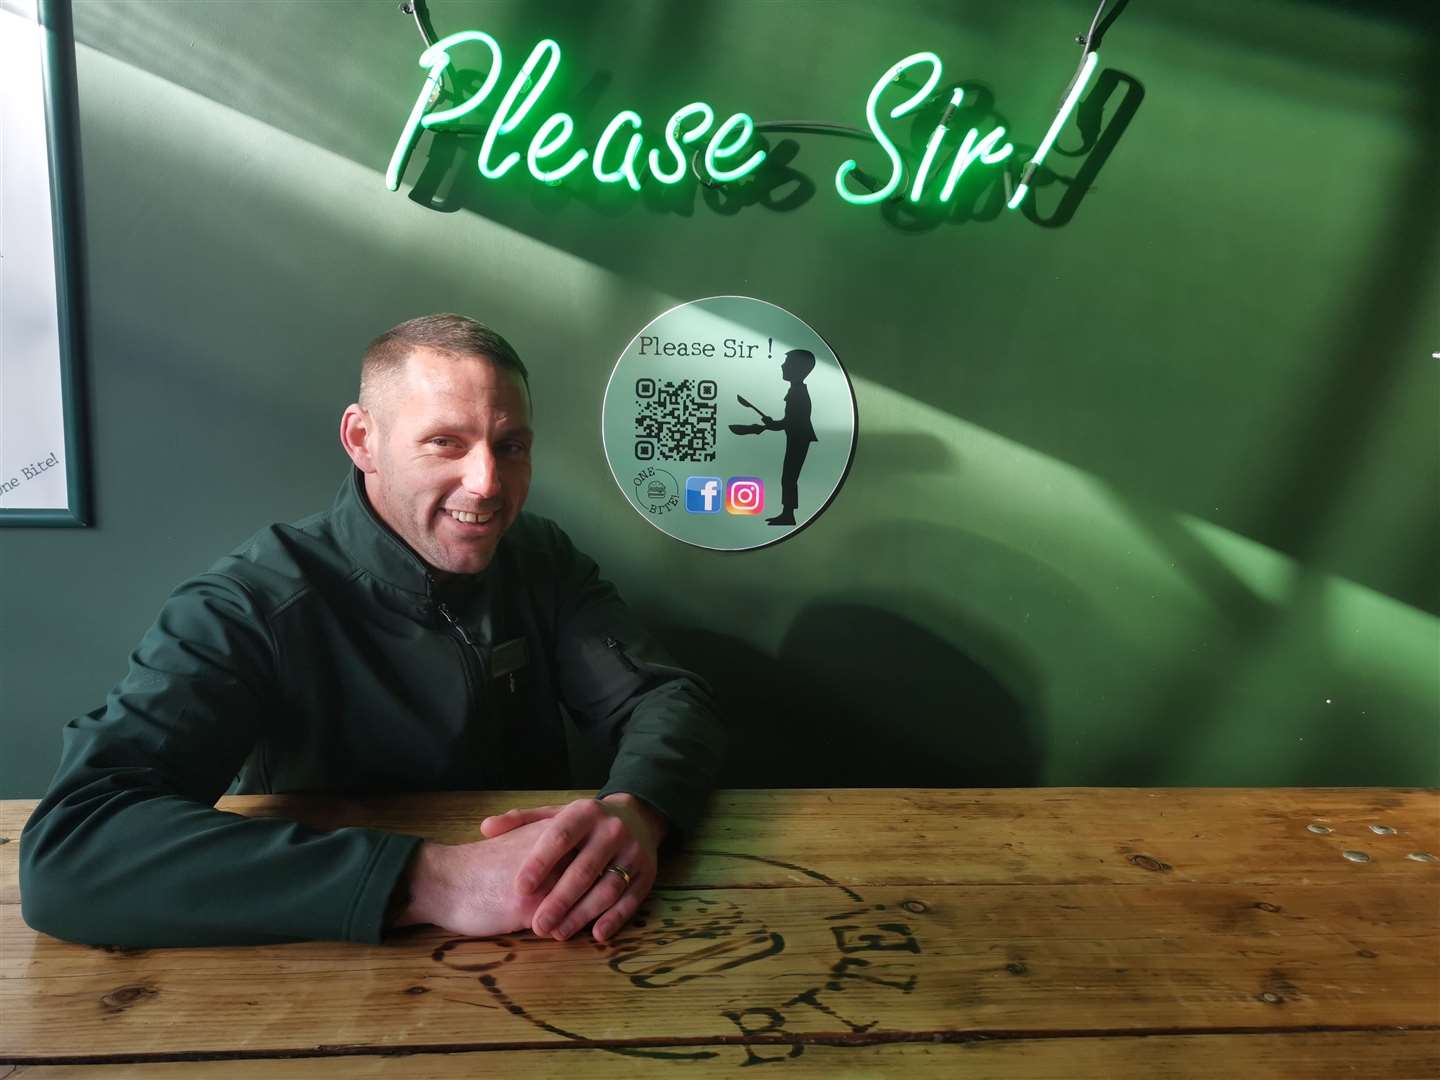 Please Sir! owner Steve Lawrence announced the expansion plans on Facebook Live